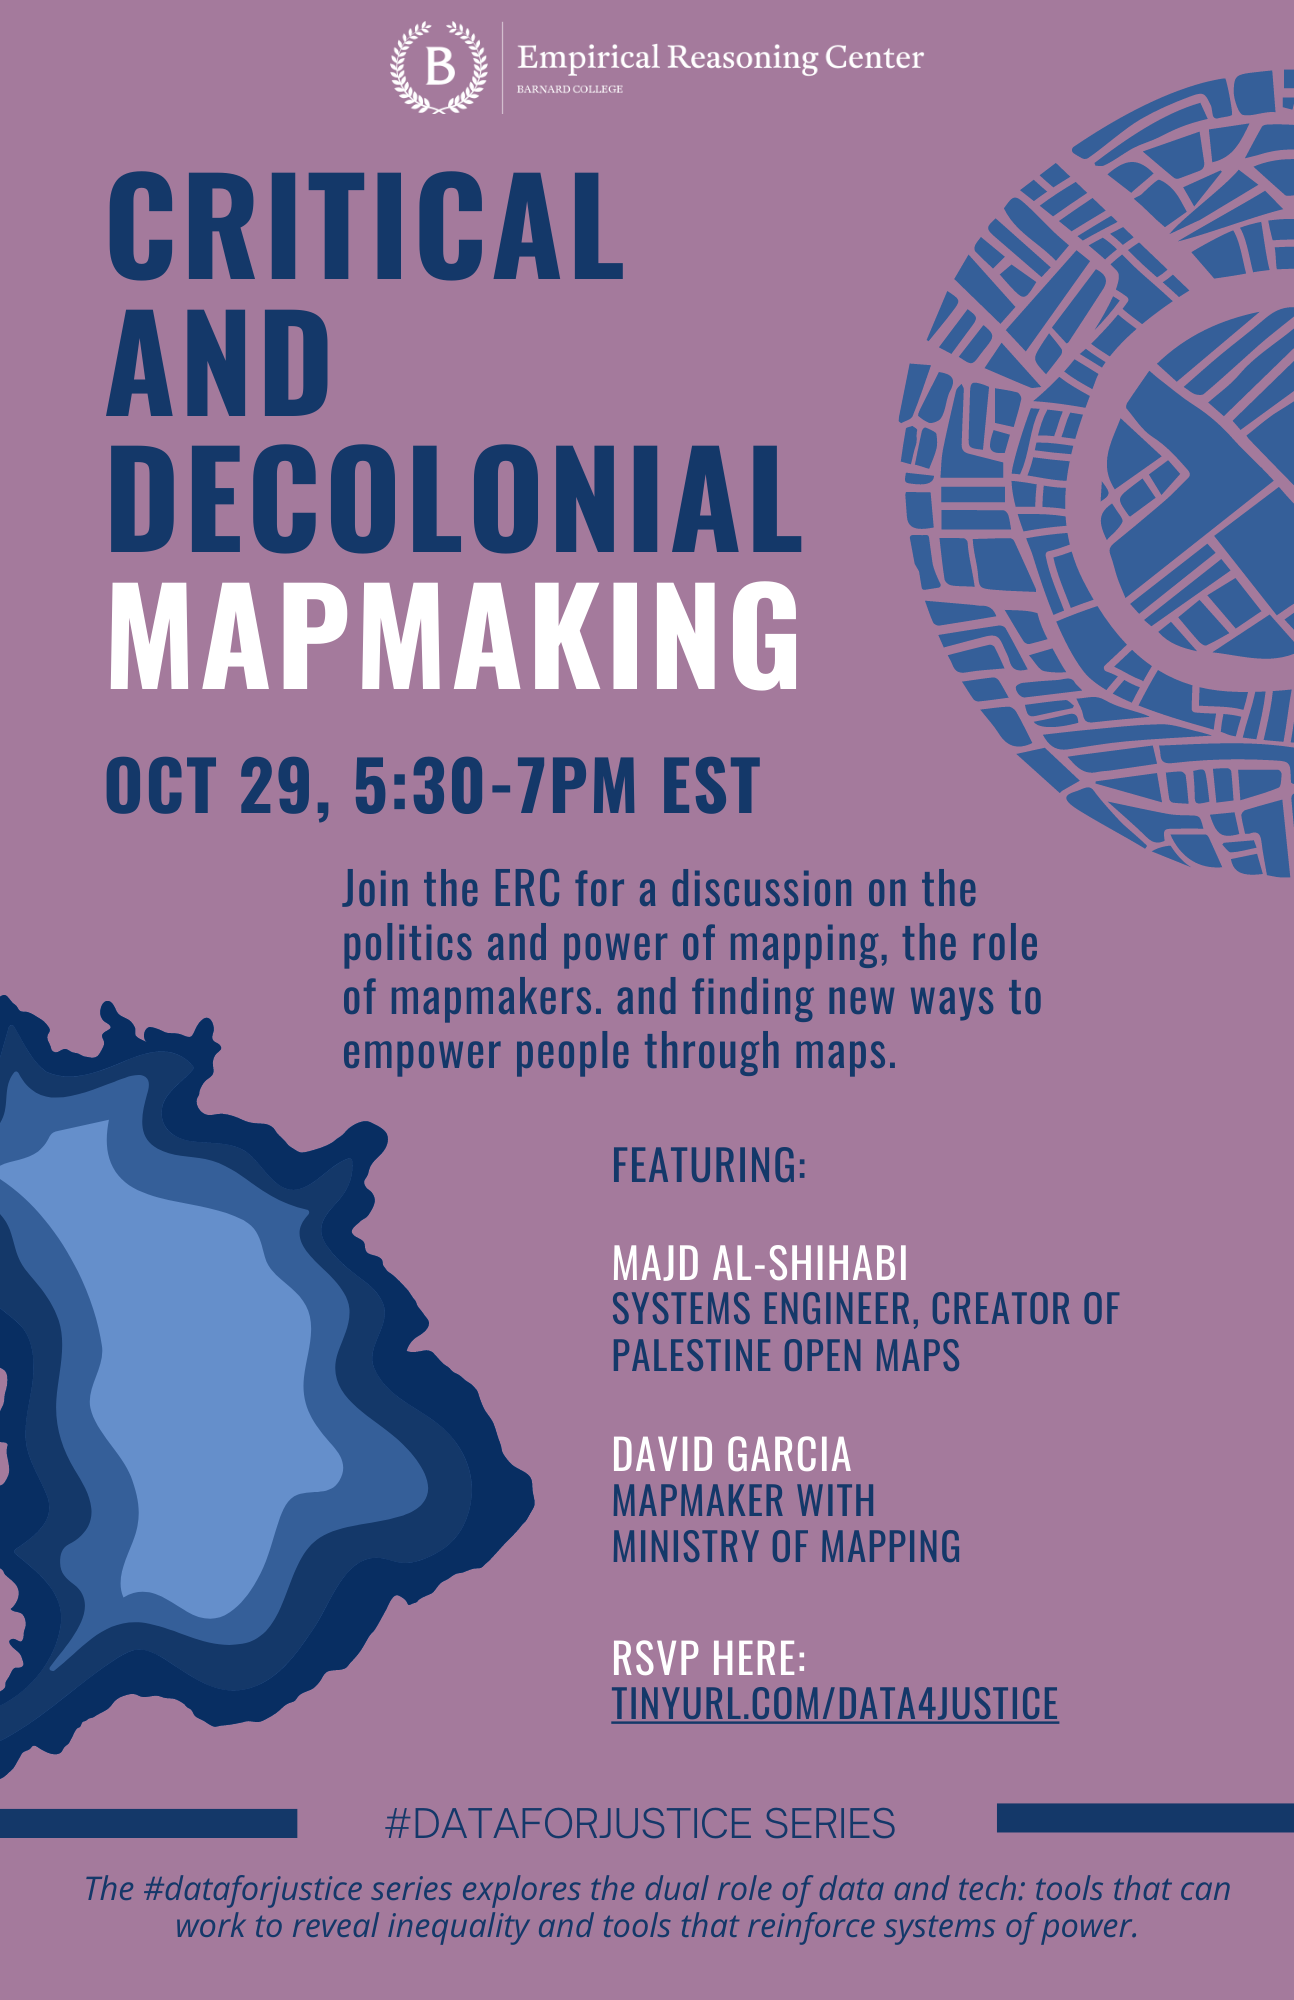 Flier for Critical and Decolonial Mapmaking Event